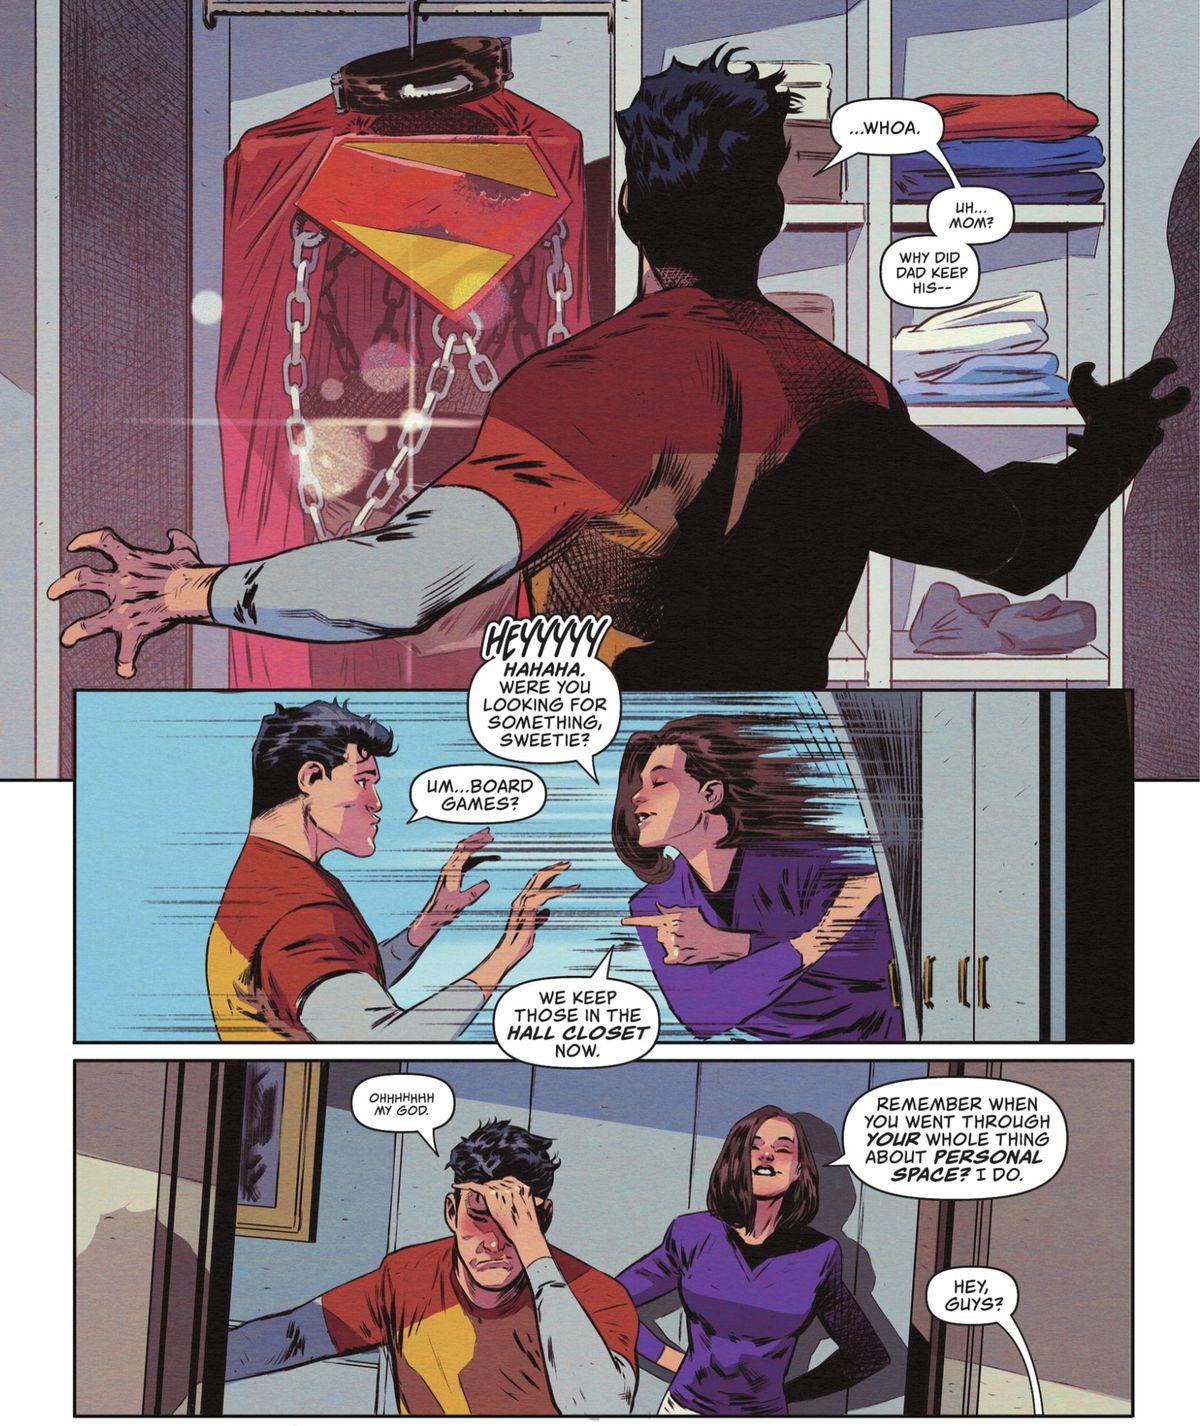 Jon Kent opens his parents closet looking for board games, only to find his father’s extremely skimpy Warworld costume with it’s chains and collar. Lois Lane slams the door shut as Jon groans “Ohhhhhhh my god.” She gently reprimands him about parent/child personal space. 